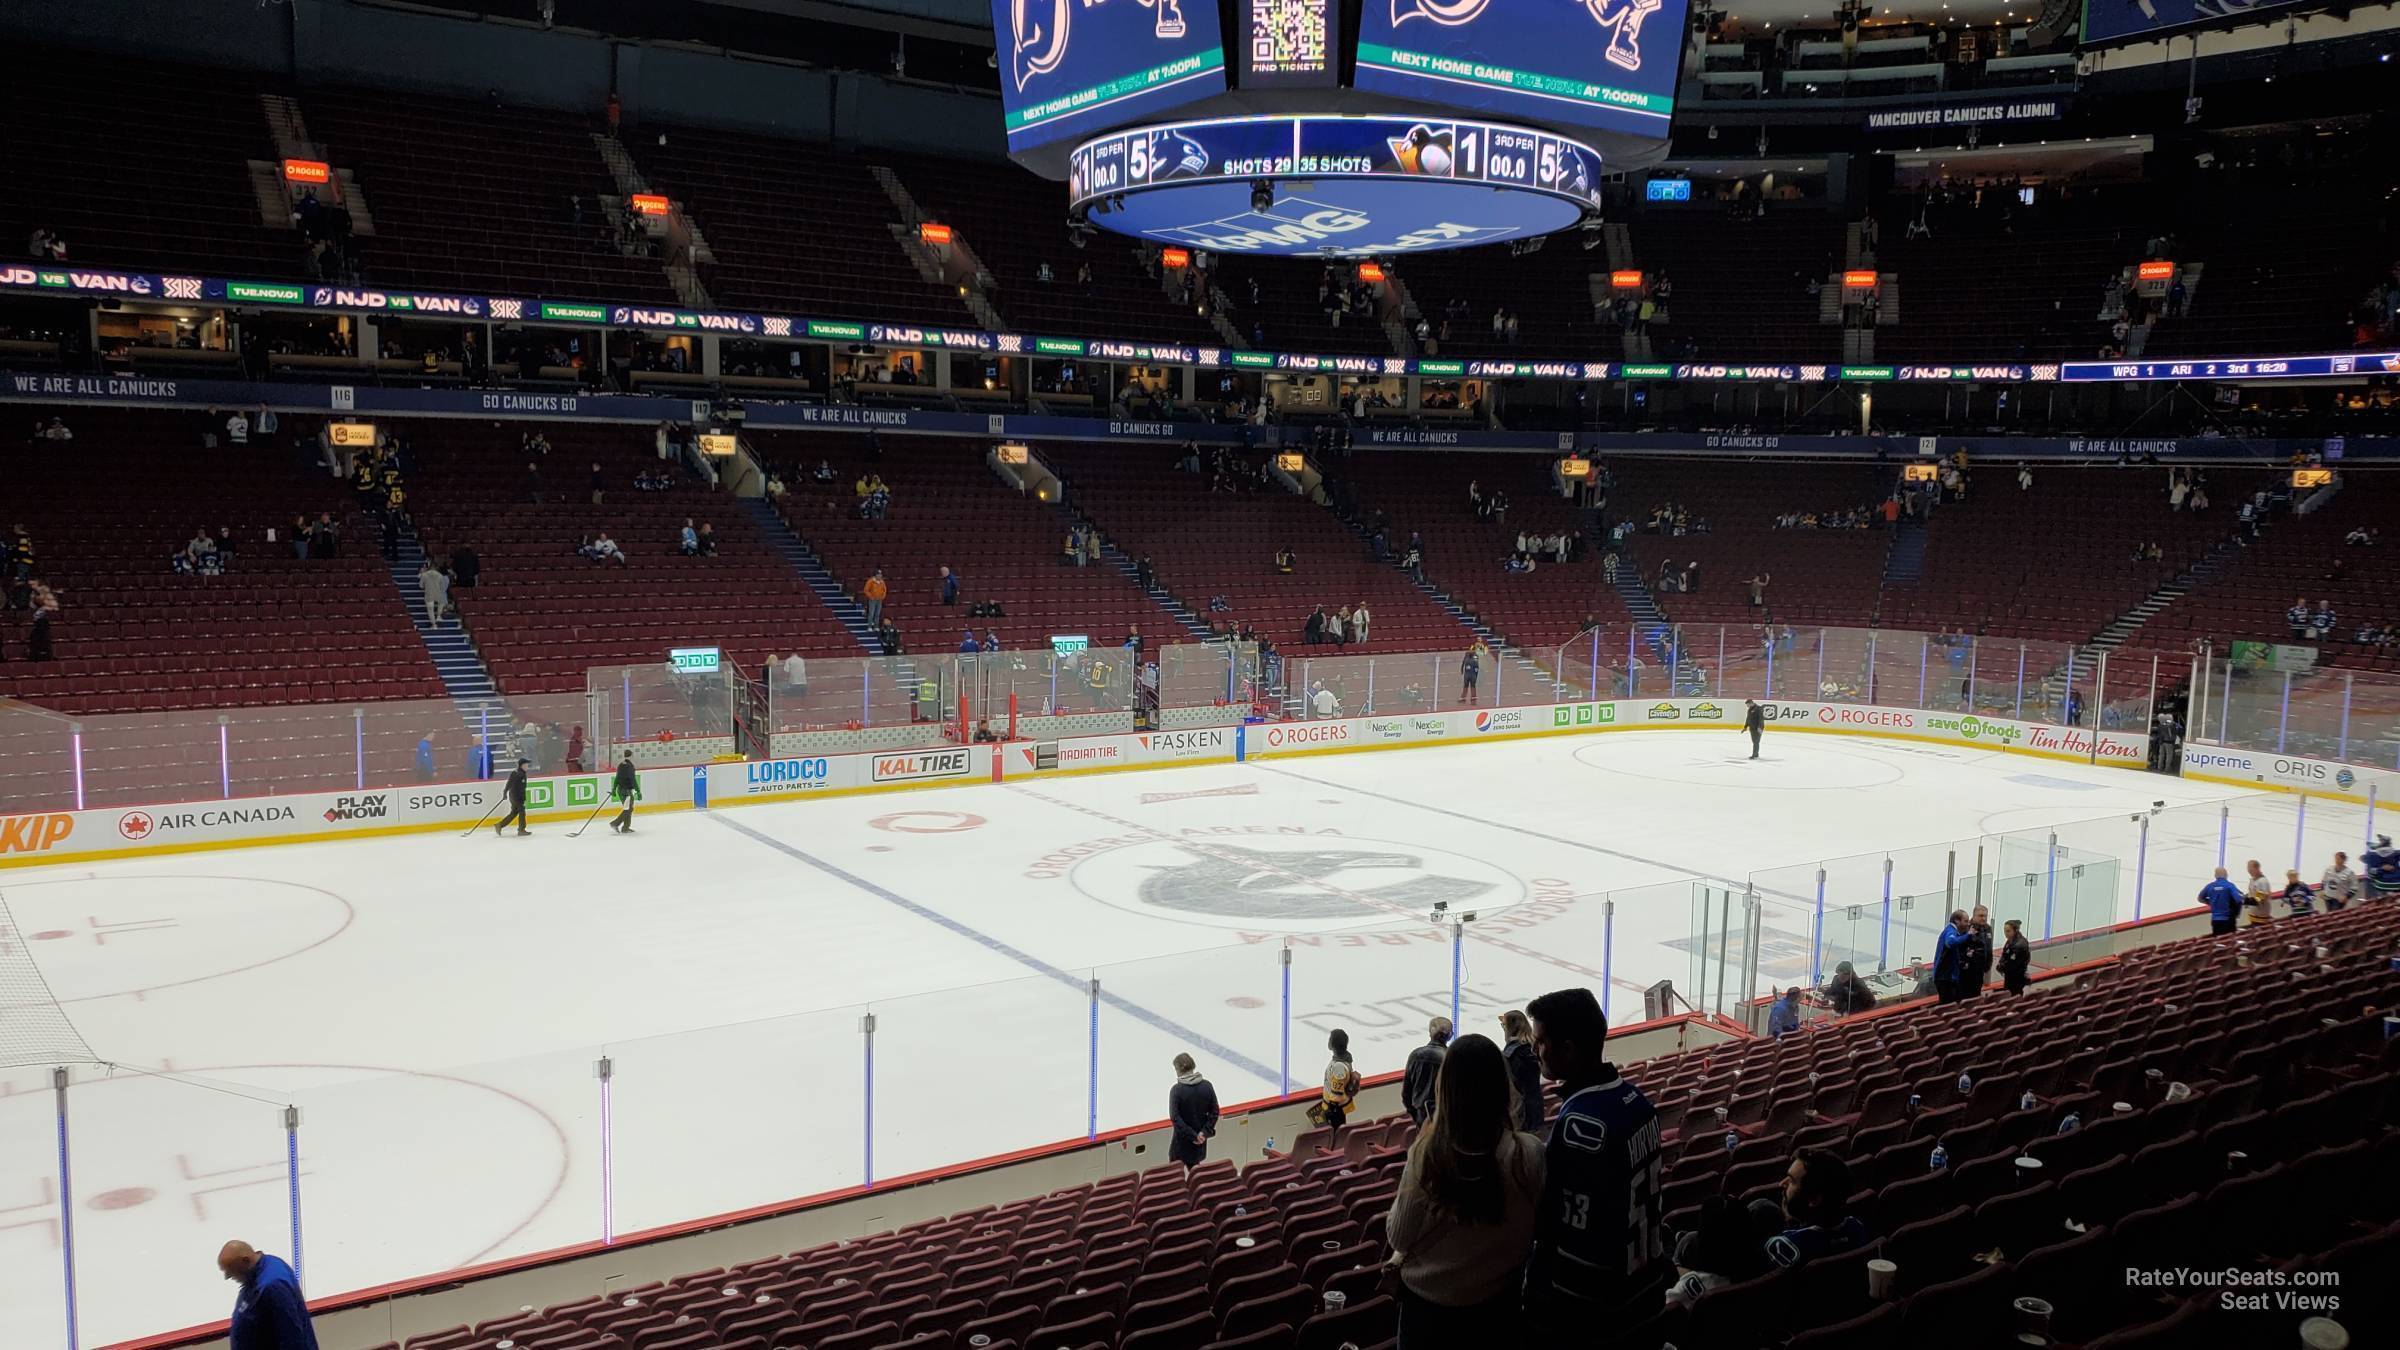 section 108, row 20 seat view  for hockey - rogers arena